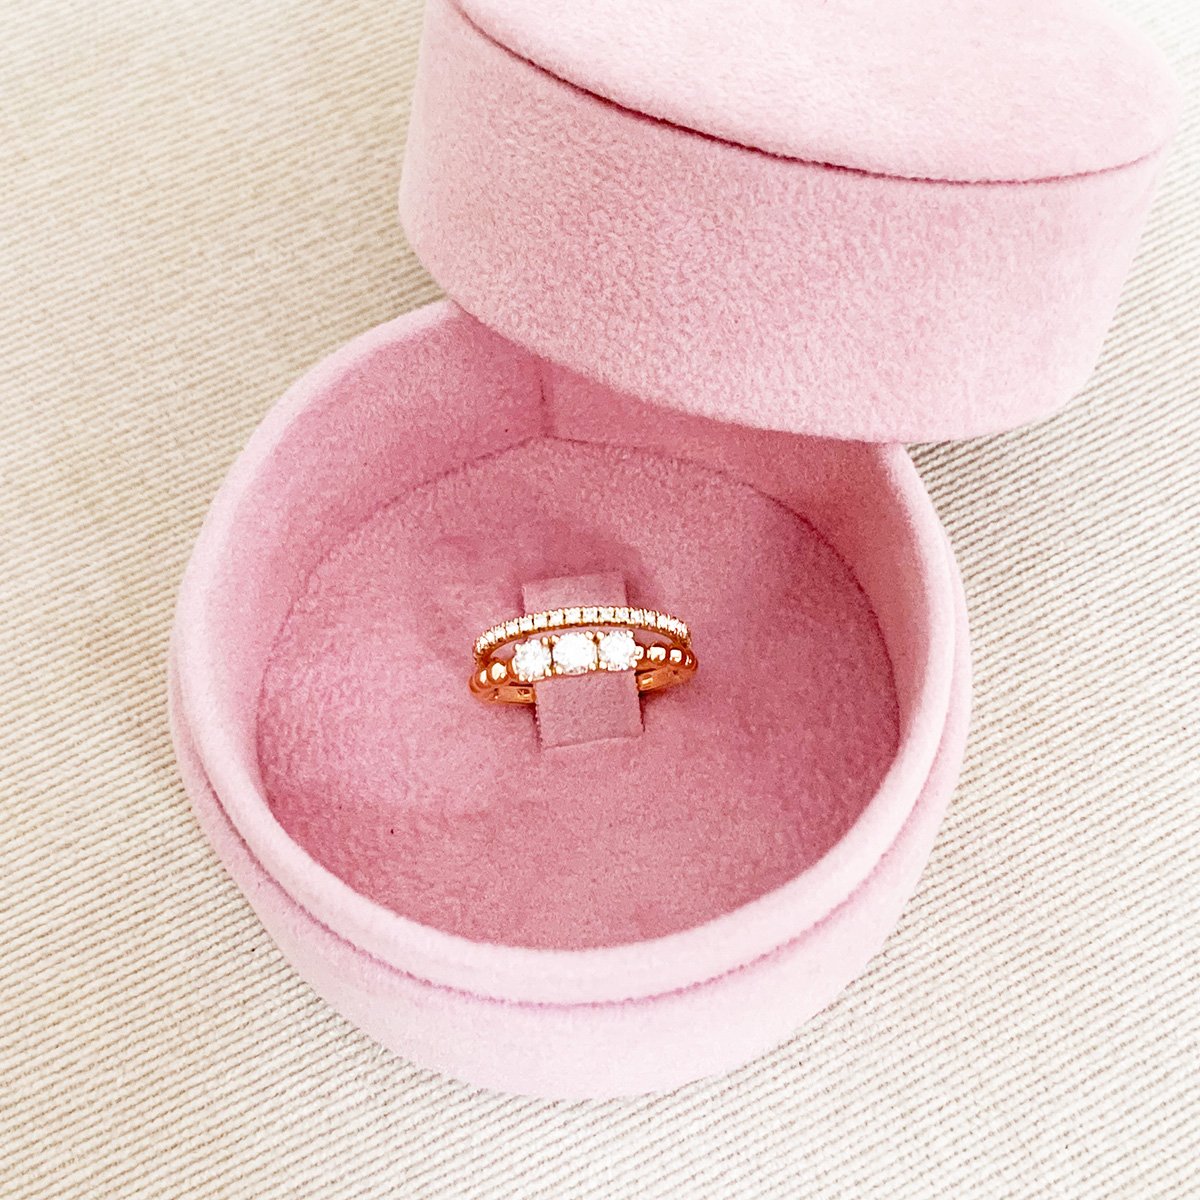 Custom-made engagement ring in 18K gold and diamonds